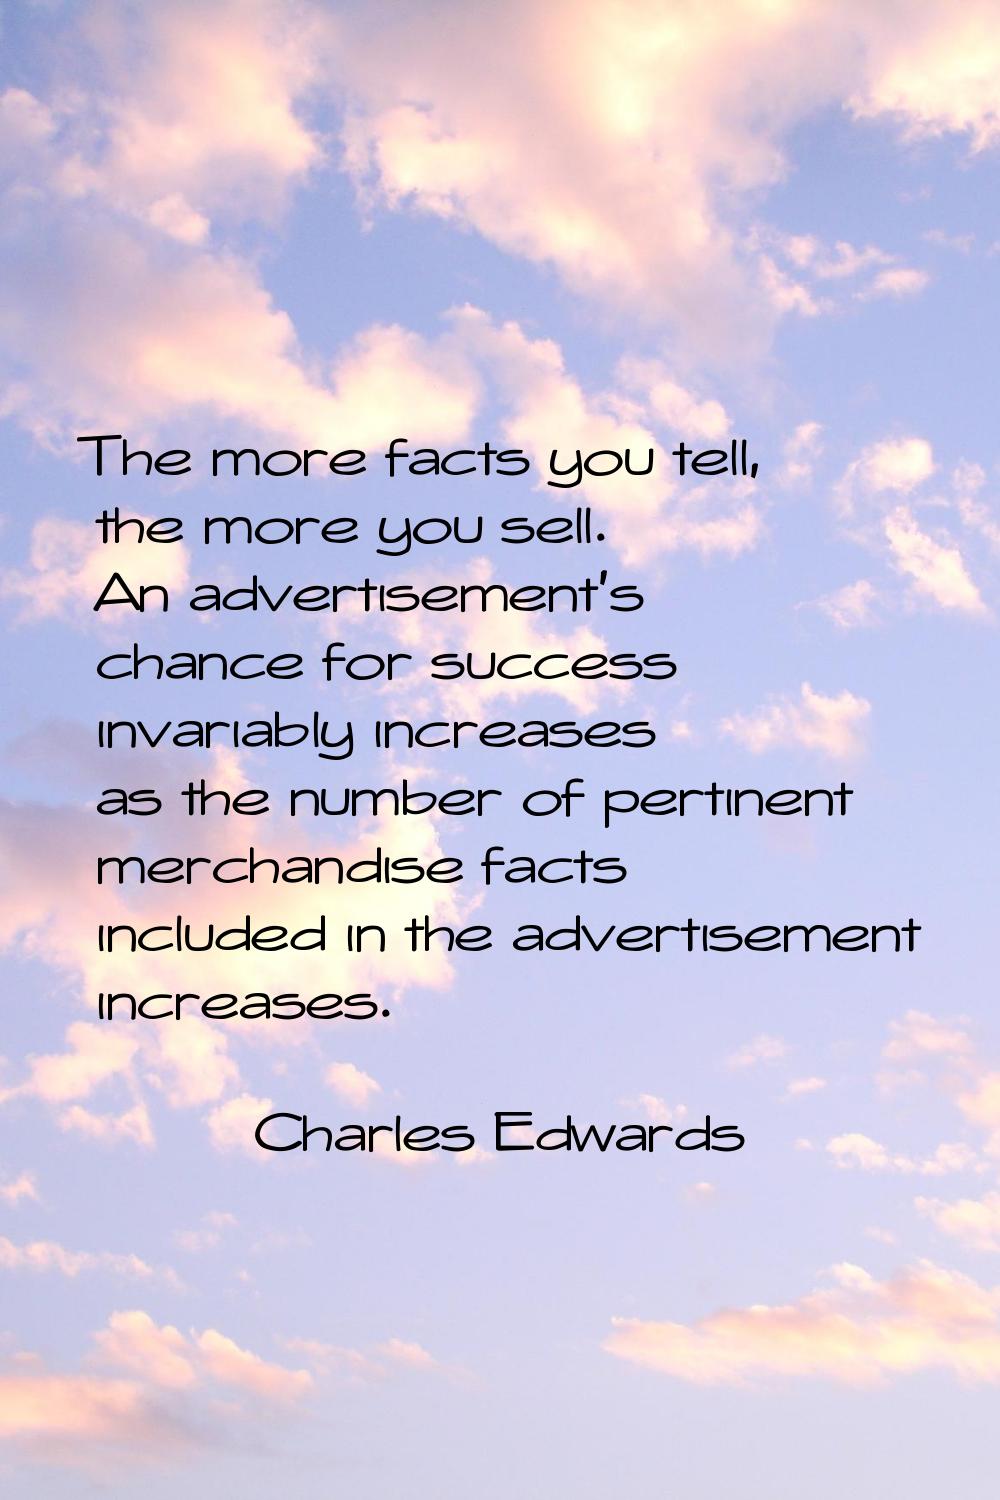 The more facts you tell, the more you sell. An advertisement's chance for success invariably increa